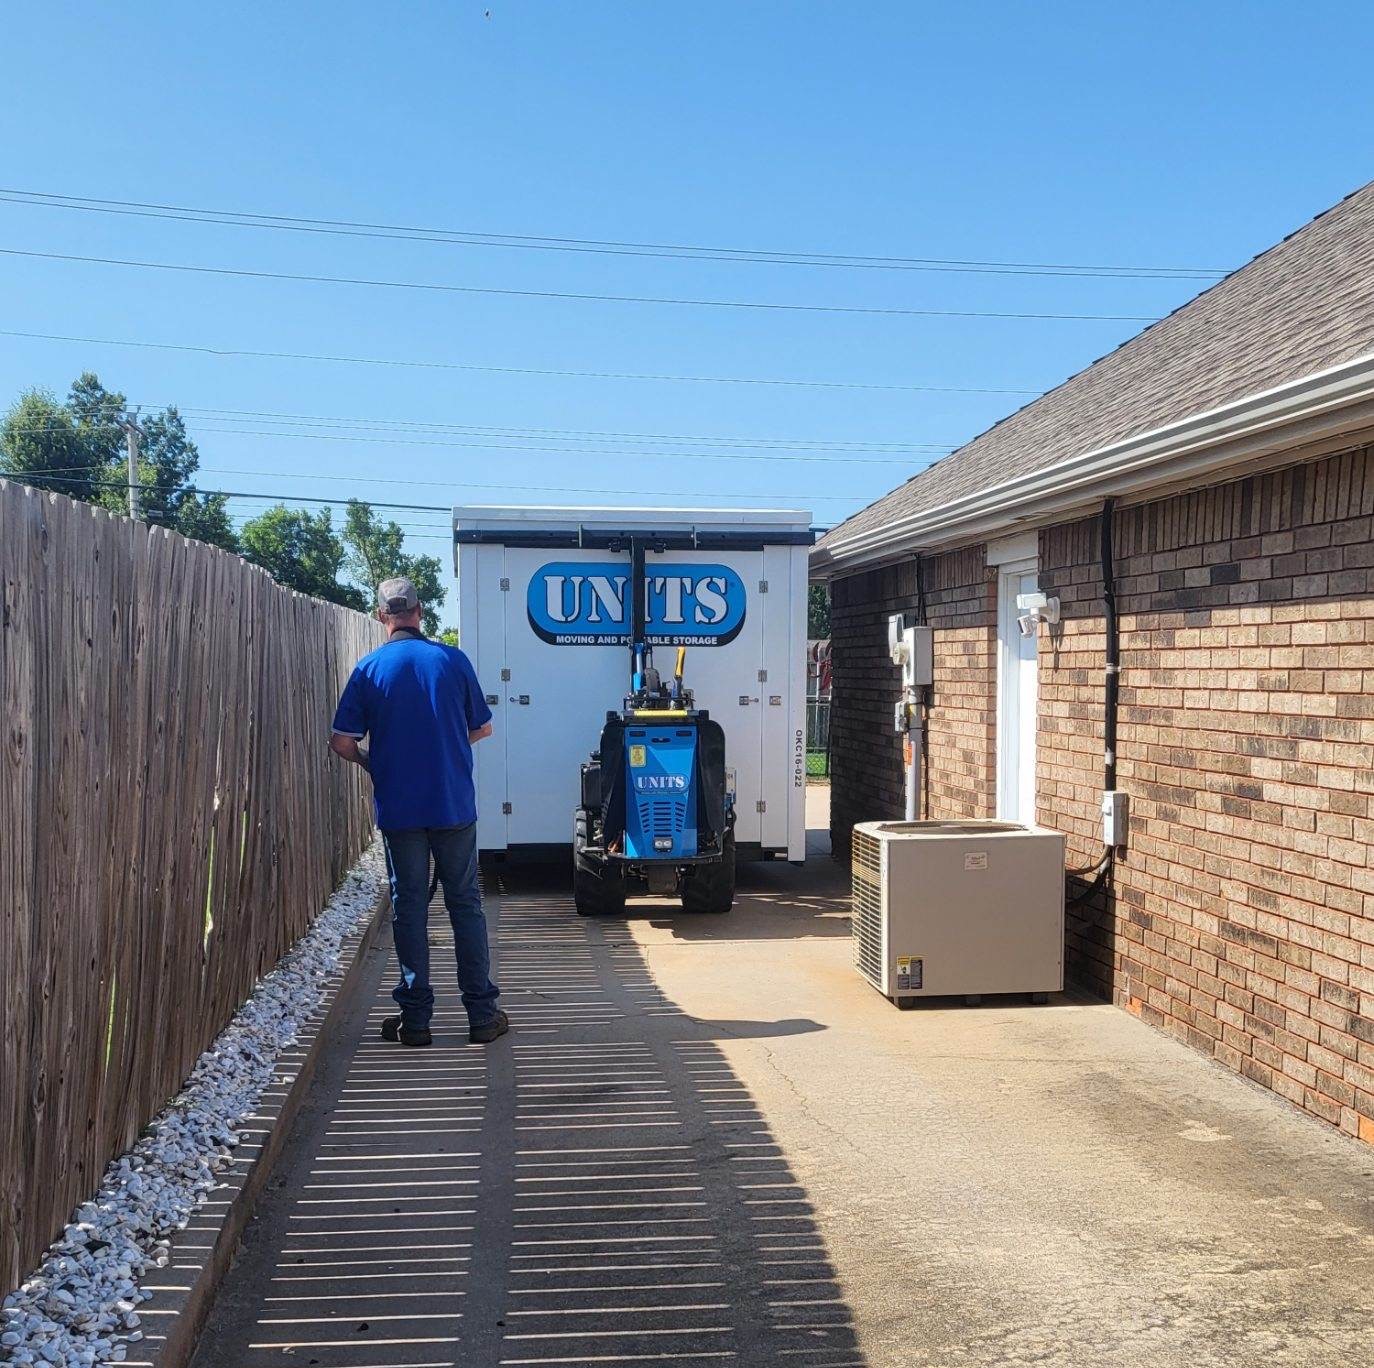 A Units of Oklahoma City container sitting in a driveway.